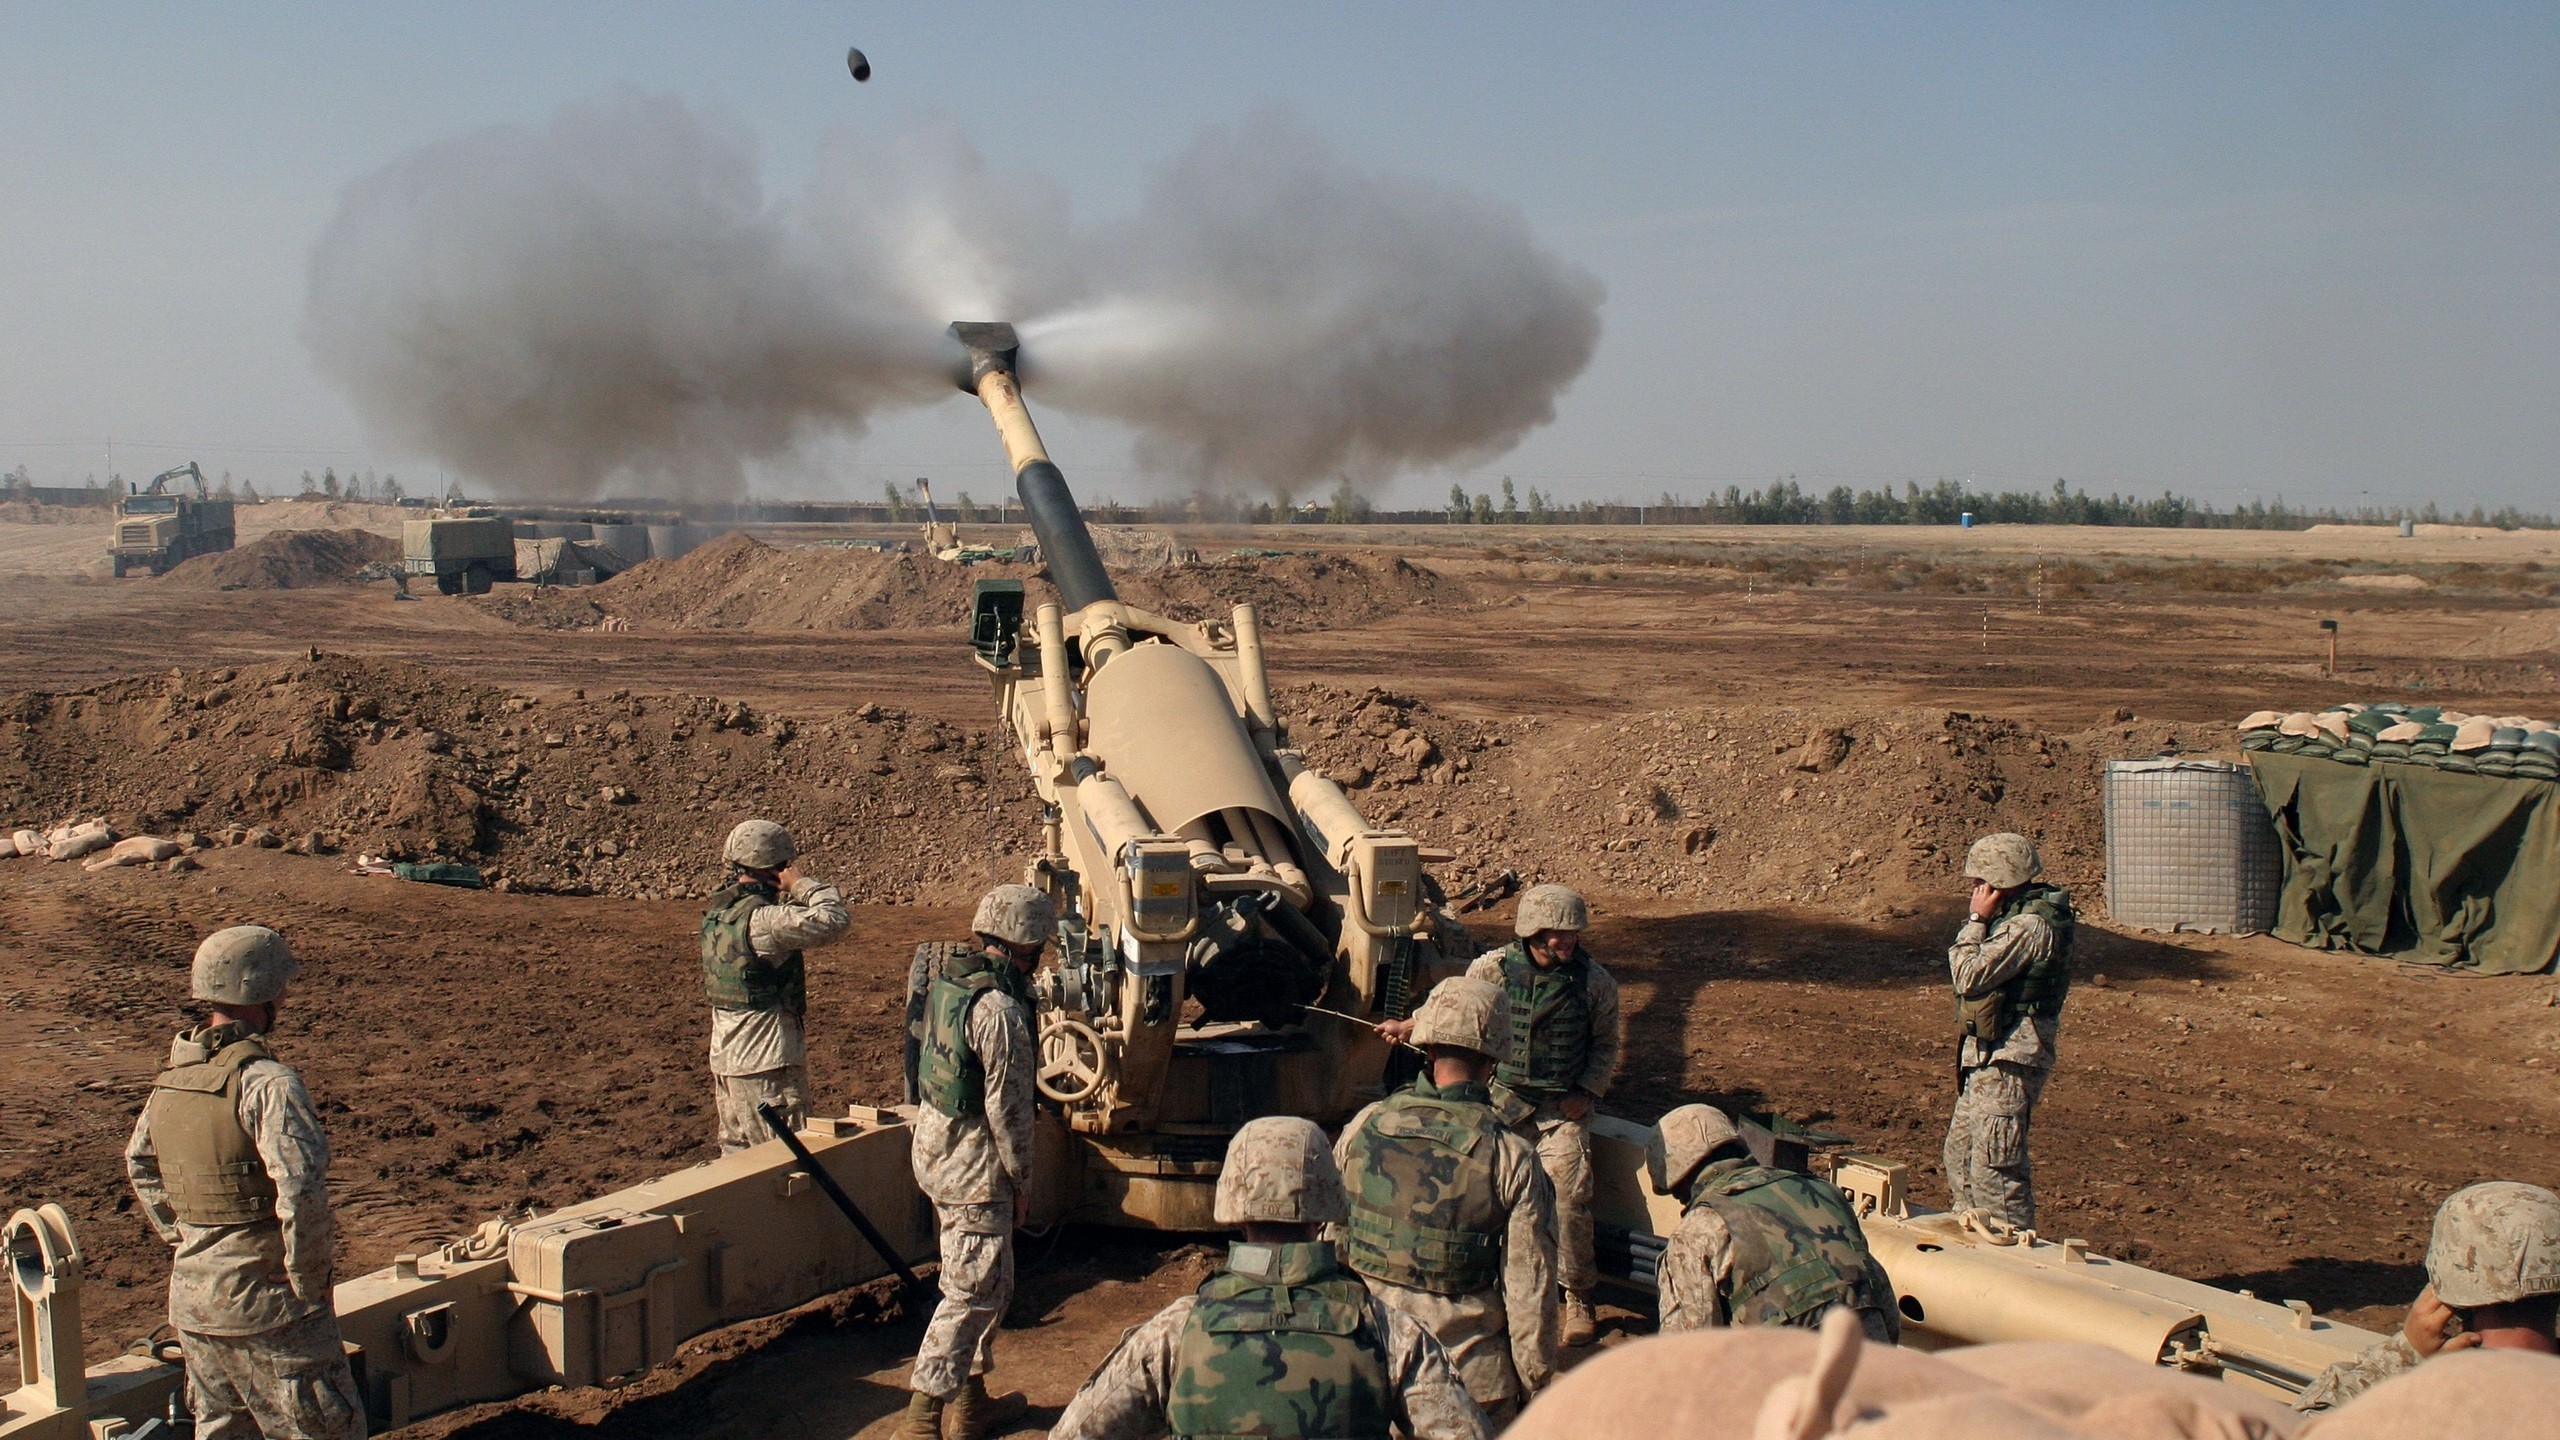 People 2560x1440 artillery Howitzer military weapon soldier outdoors United States Marine Corps